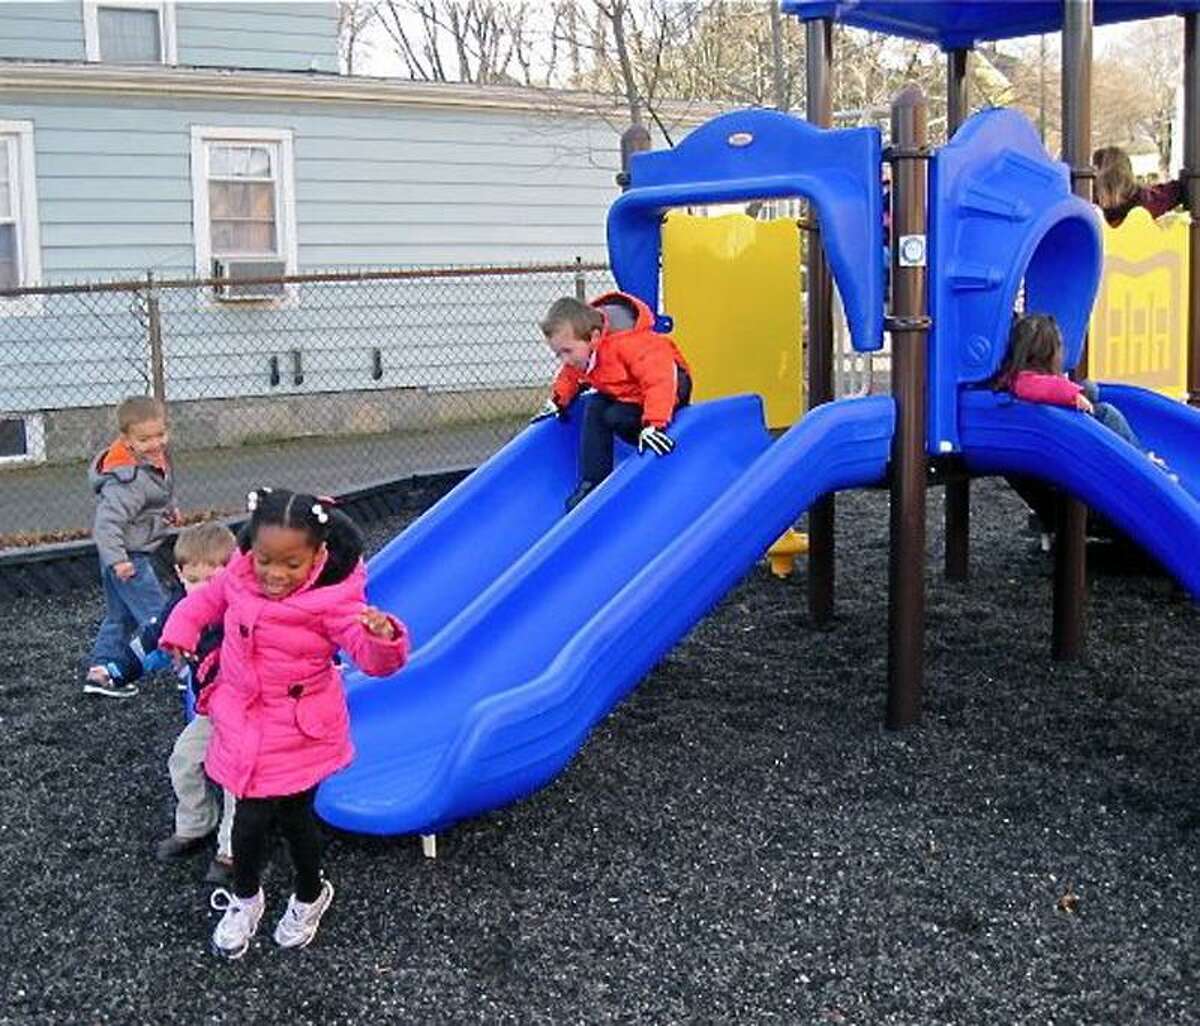 Jaelyne Dure, 4, of Derby, is all smiles as she gets off a slide on the new playscape at St. Mary-St. Michael School in Derby. She is joined by Maksim Godbolt, 4,, of Derby, standing left rear, and Cooper Wherley, 5, of Ansonia on the slide. Patricia Villers/Register